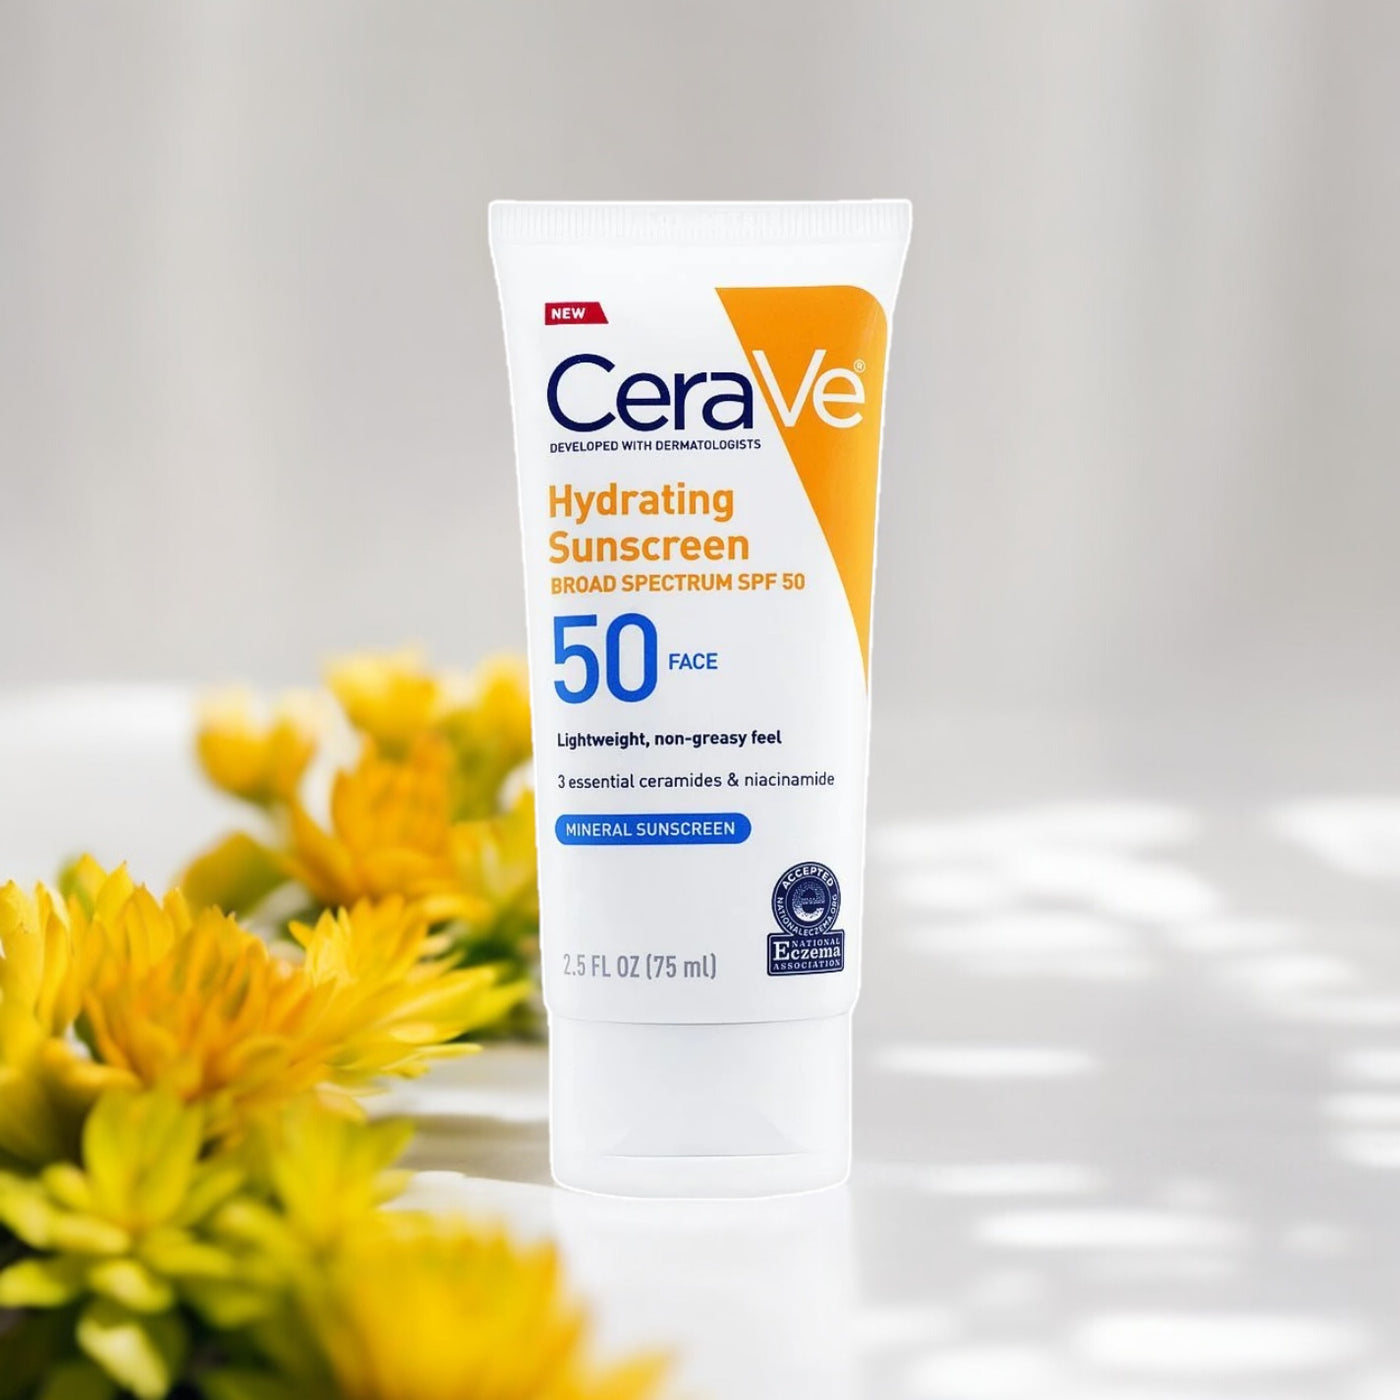 CeraVe New Hydrating Mineral Sunscreen